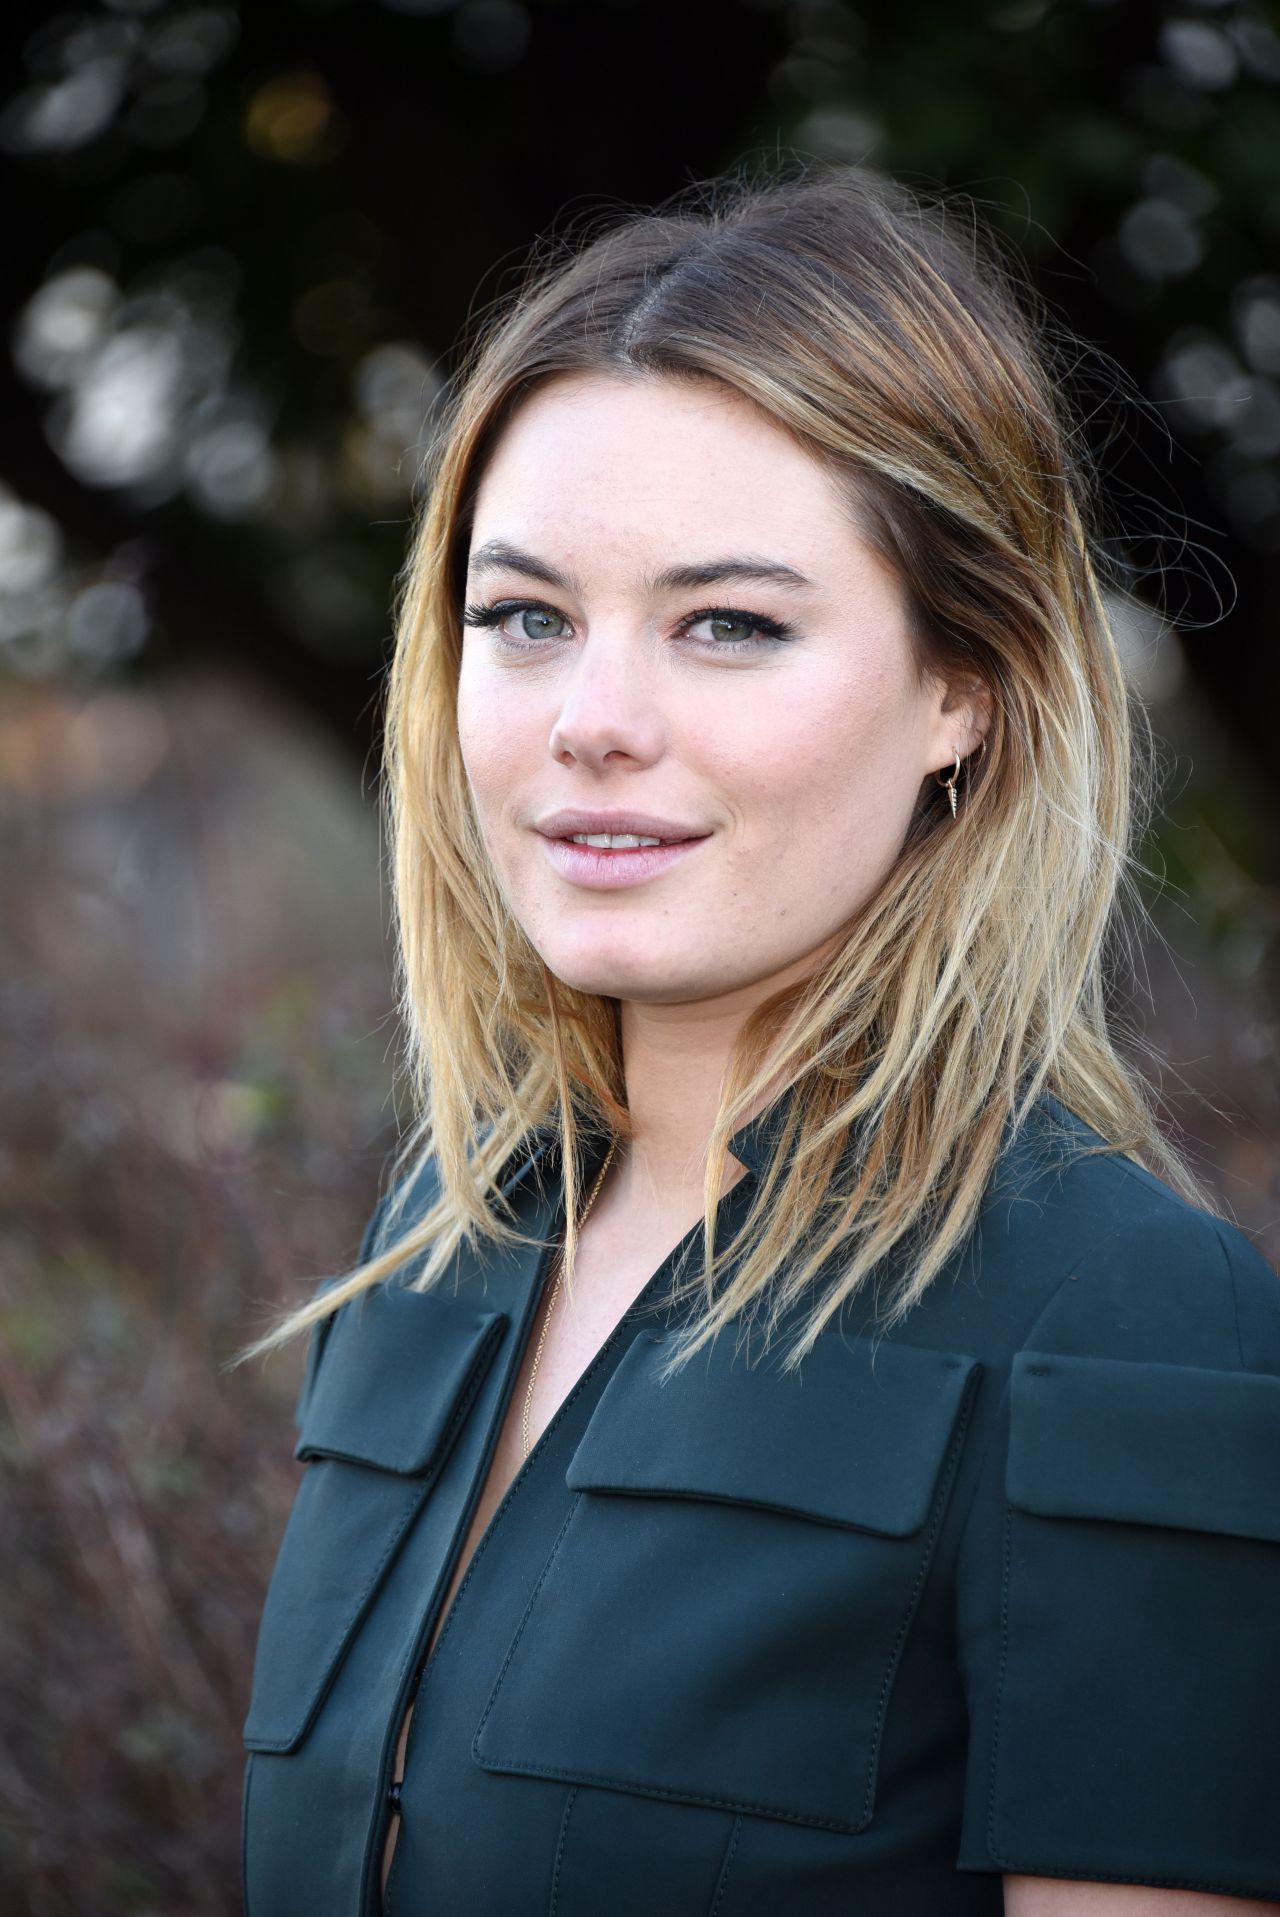 Camille Rowe Backgrounds, Compatible - PC, Mobile, Gadgets| 1280x1917 px